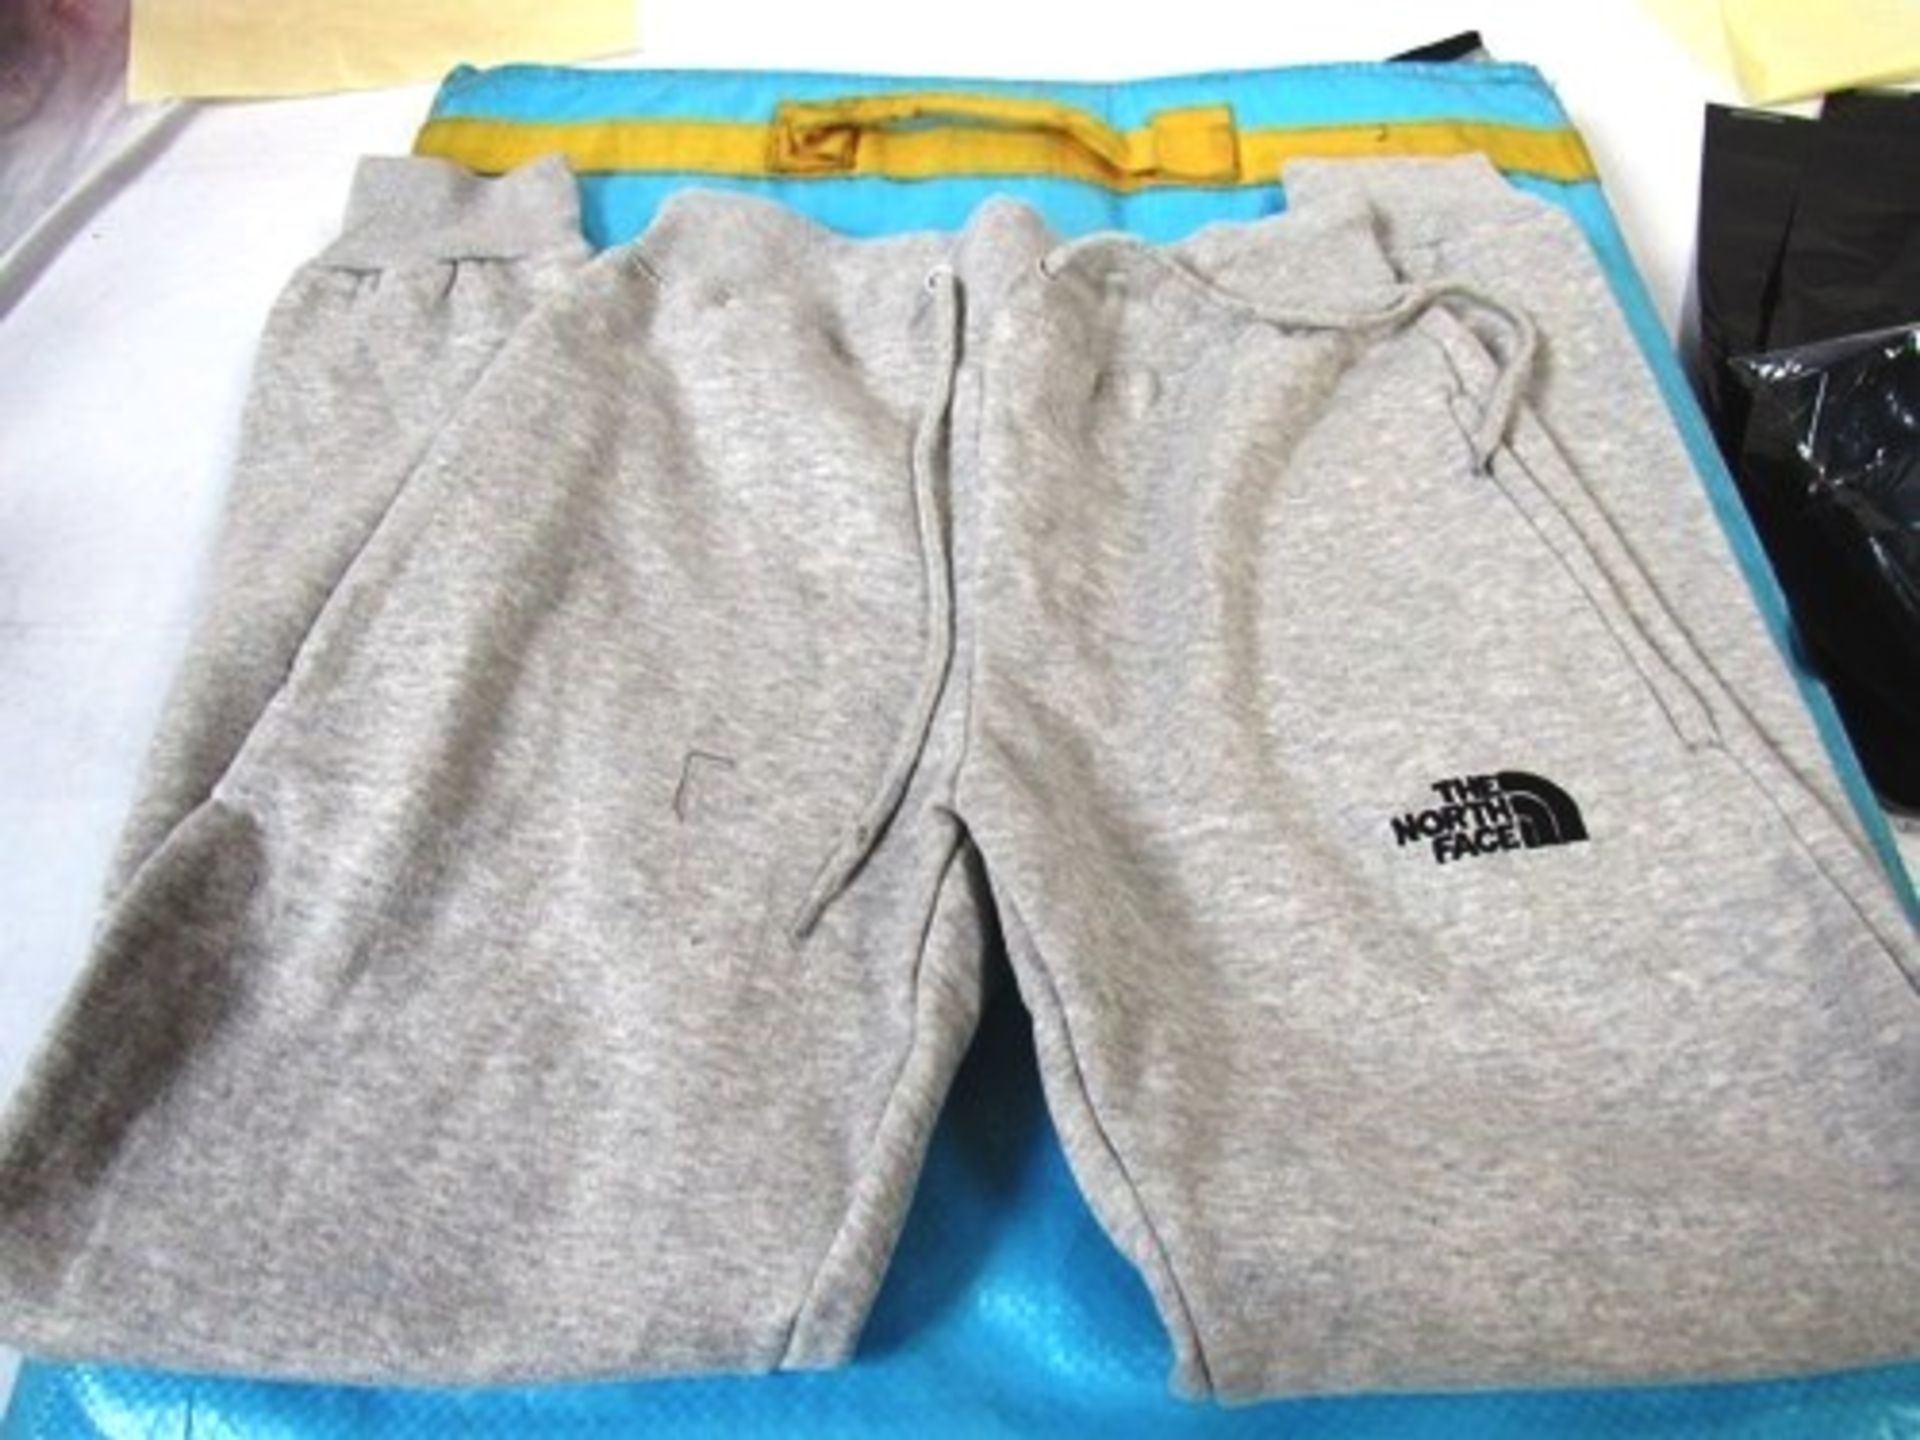 Approximately 20 x pieces of clothing in the style of North Face brand, sweatshirts and joggers,